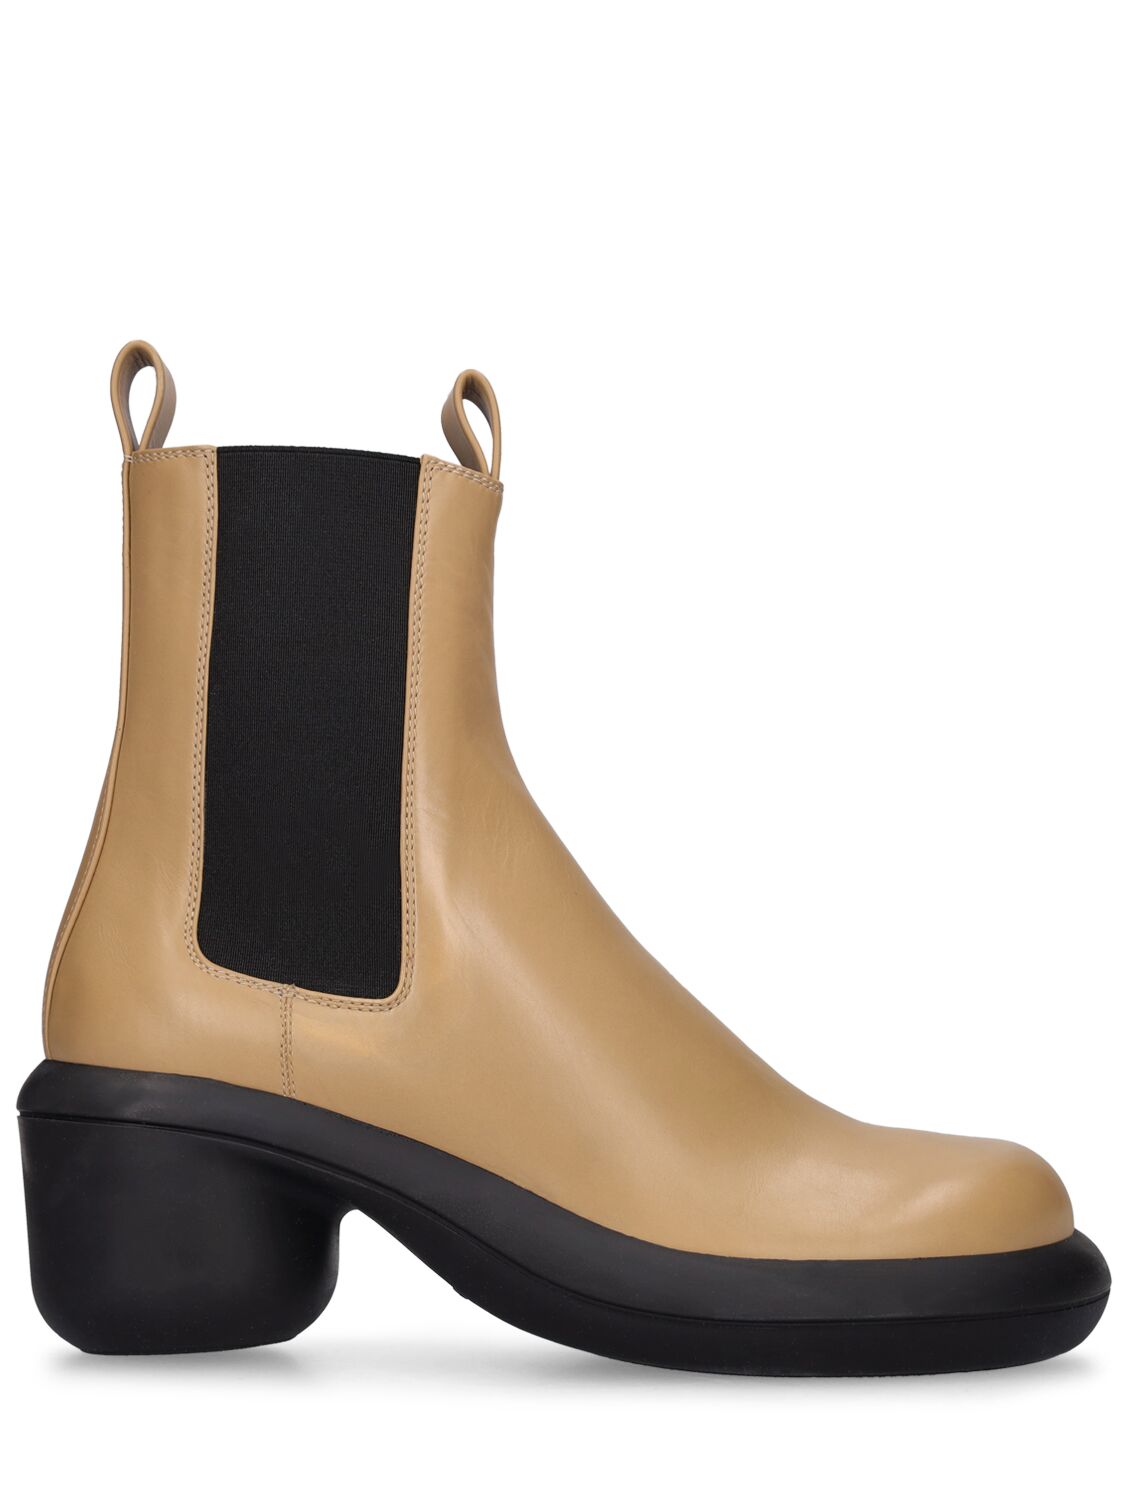 JIL SANDER Ankle boots with zip【2021 AW - 靴